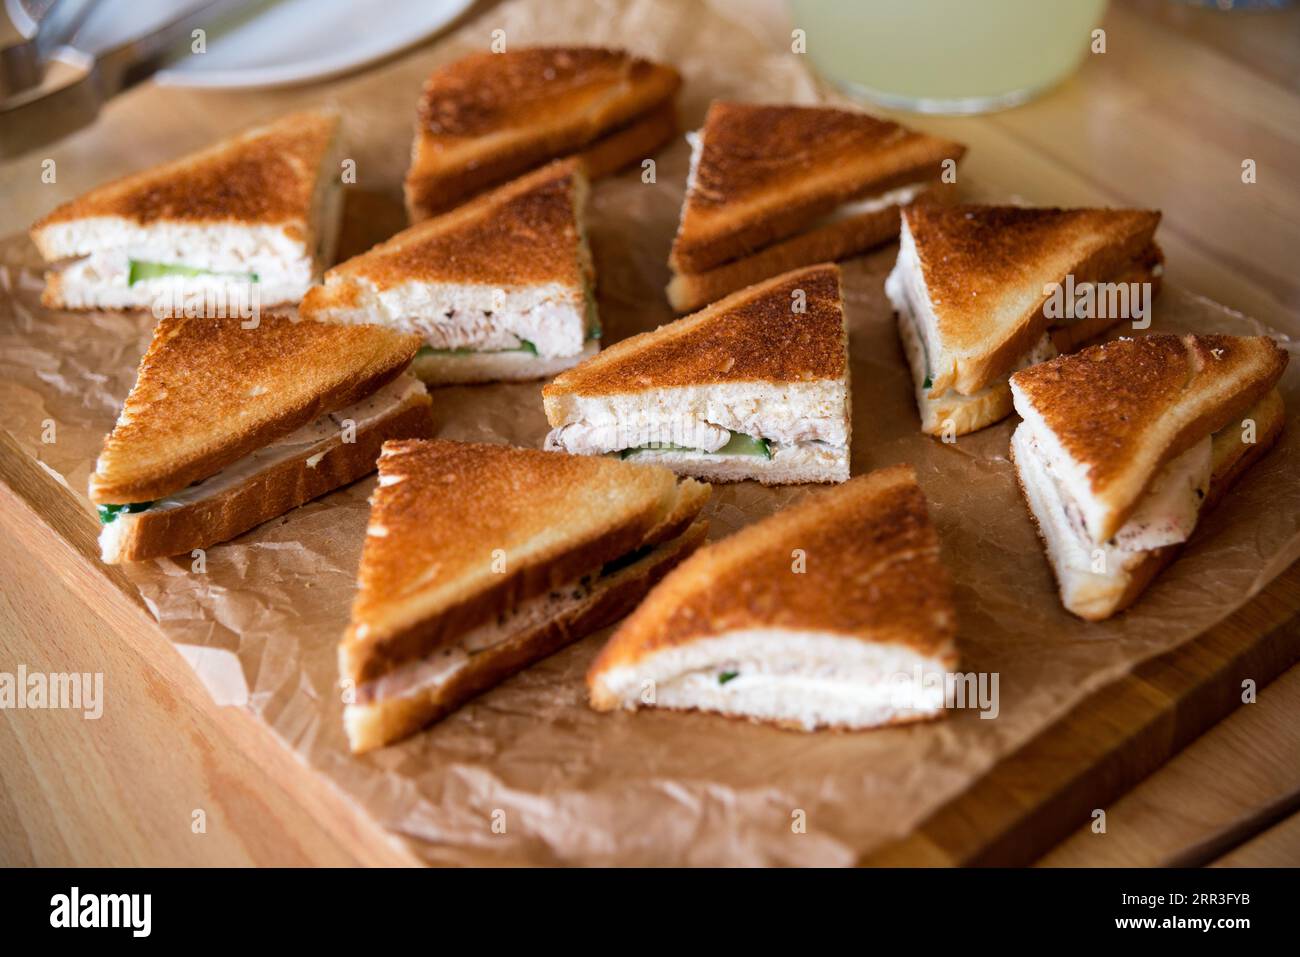 https://c8.alamy.com/comp/2RR3FYB/sandwiches-with-cheese-chicken-meat-and-cucumber-on-a-wooden-tray-catering-sandwich-display-2RR3FYB.jpg